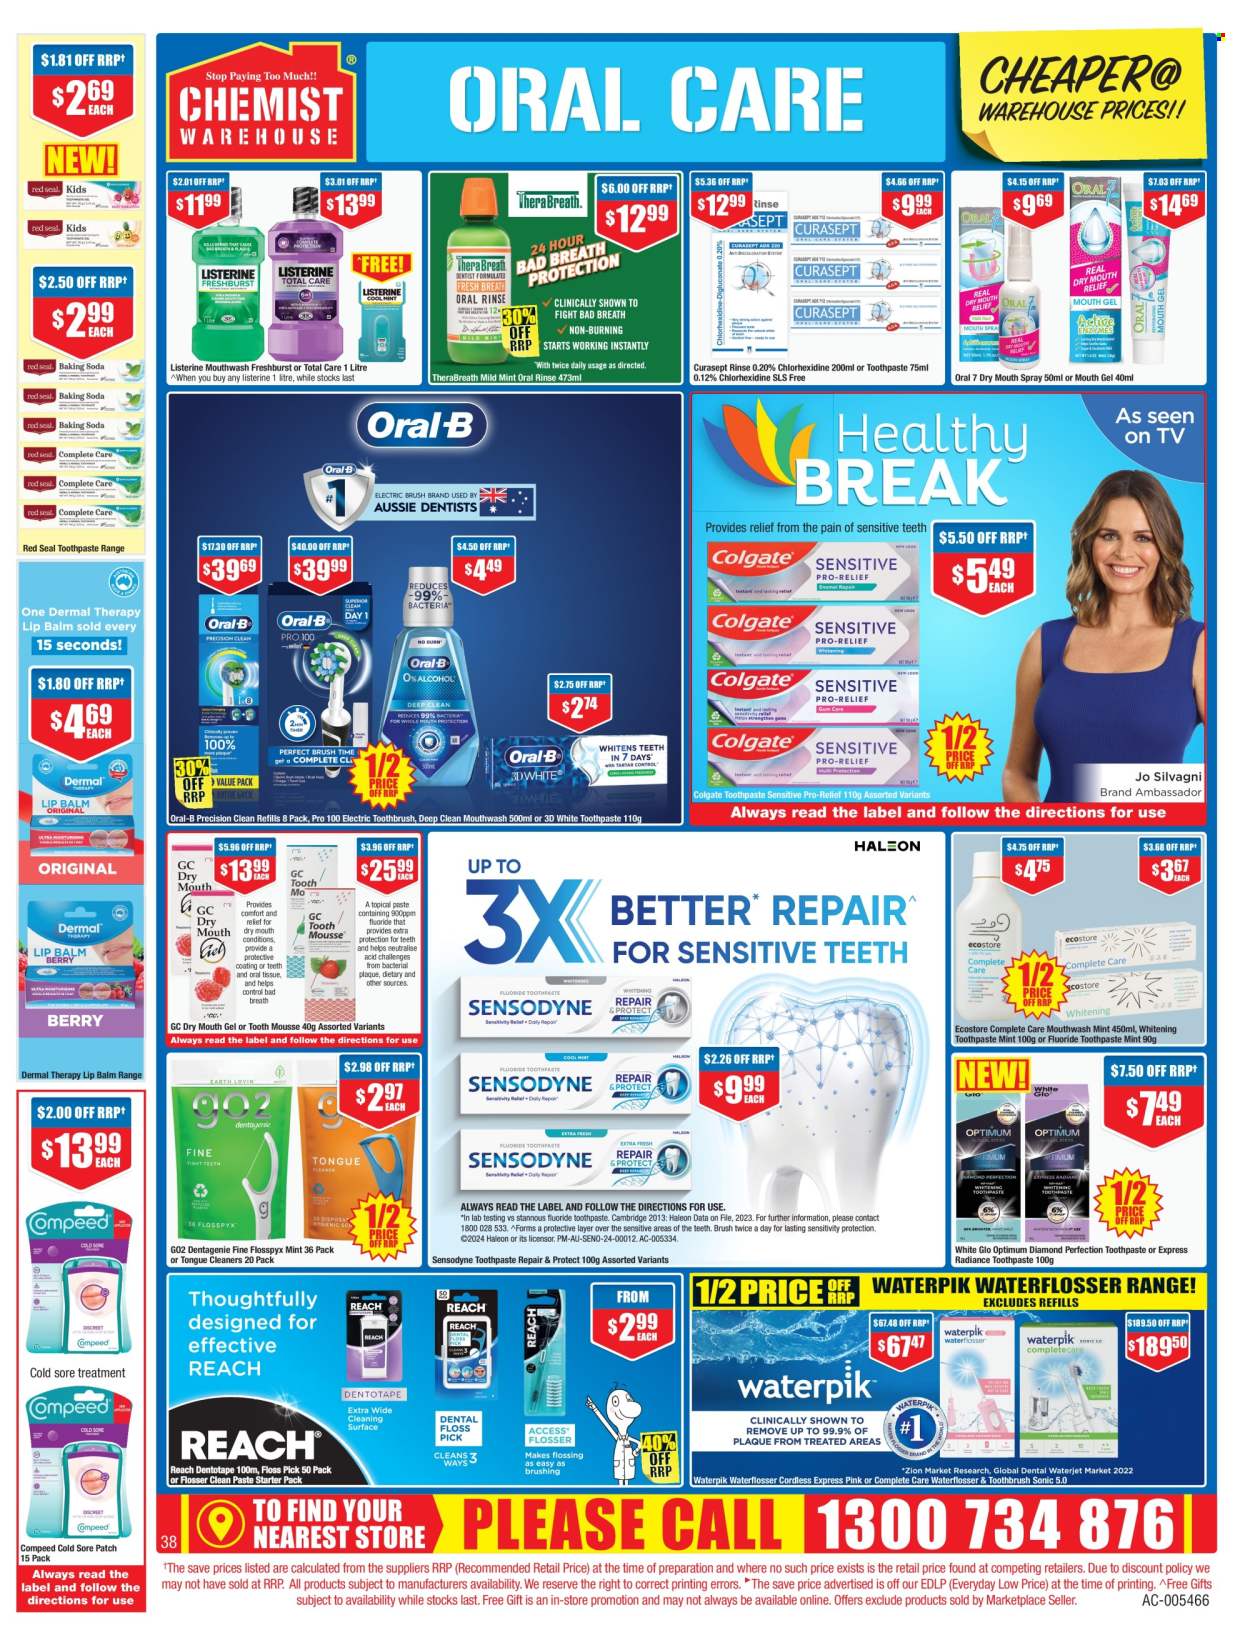 thumbnail - Chemist Warehouse Catalogue - 25 Apr 2024 - 12 May 2024 - Sales products - tissues, cleaner, Colgate, Listerine, toothbrush, Oral-B, toothpaste, Sensodyne, mouthwash, toothbrush head, teeth whitening, flosser, waterflosser, mouth spray, lip balm, mousse, sore treatment. Page 38.